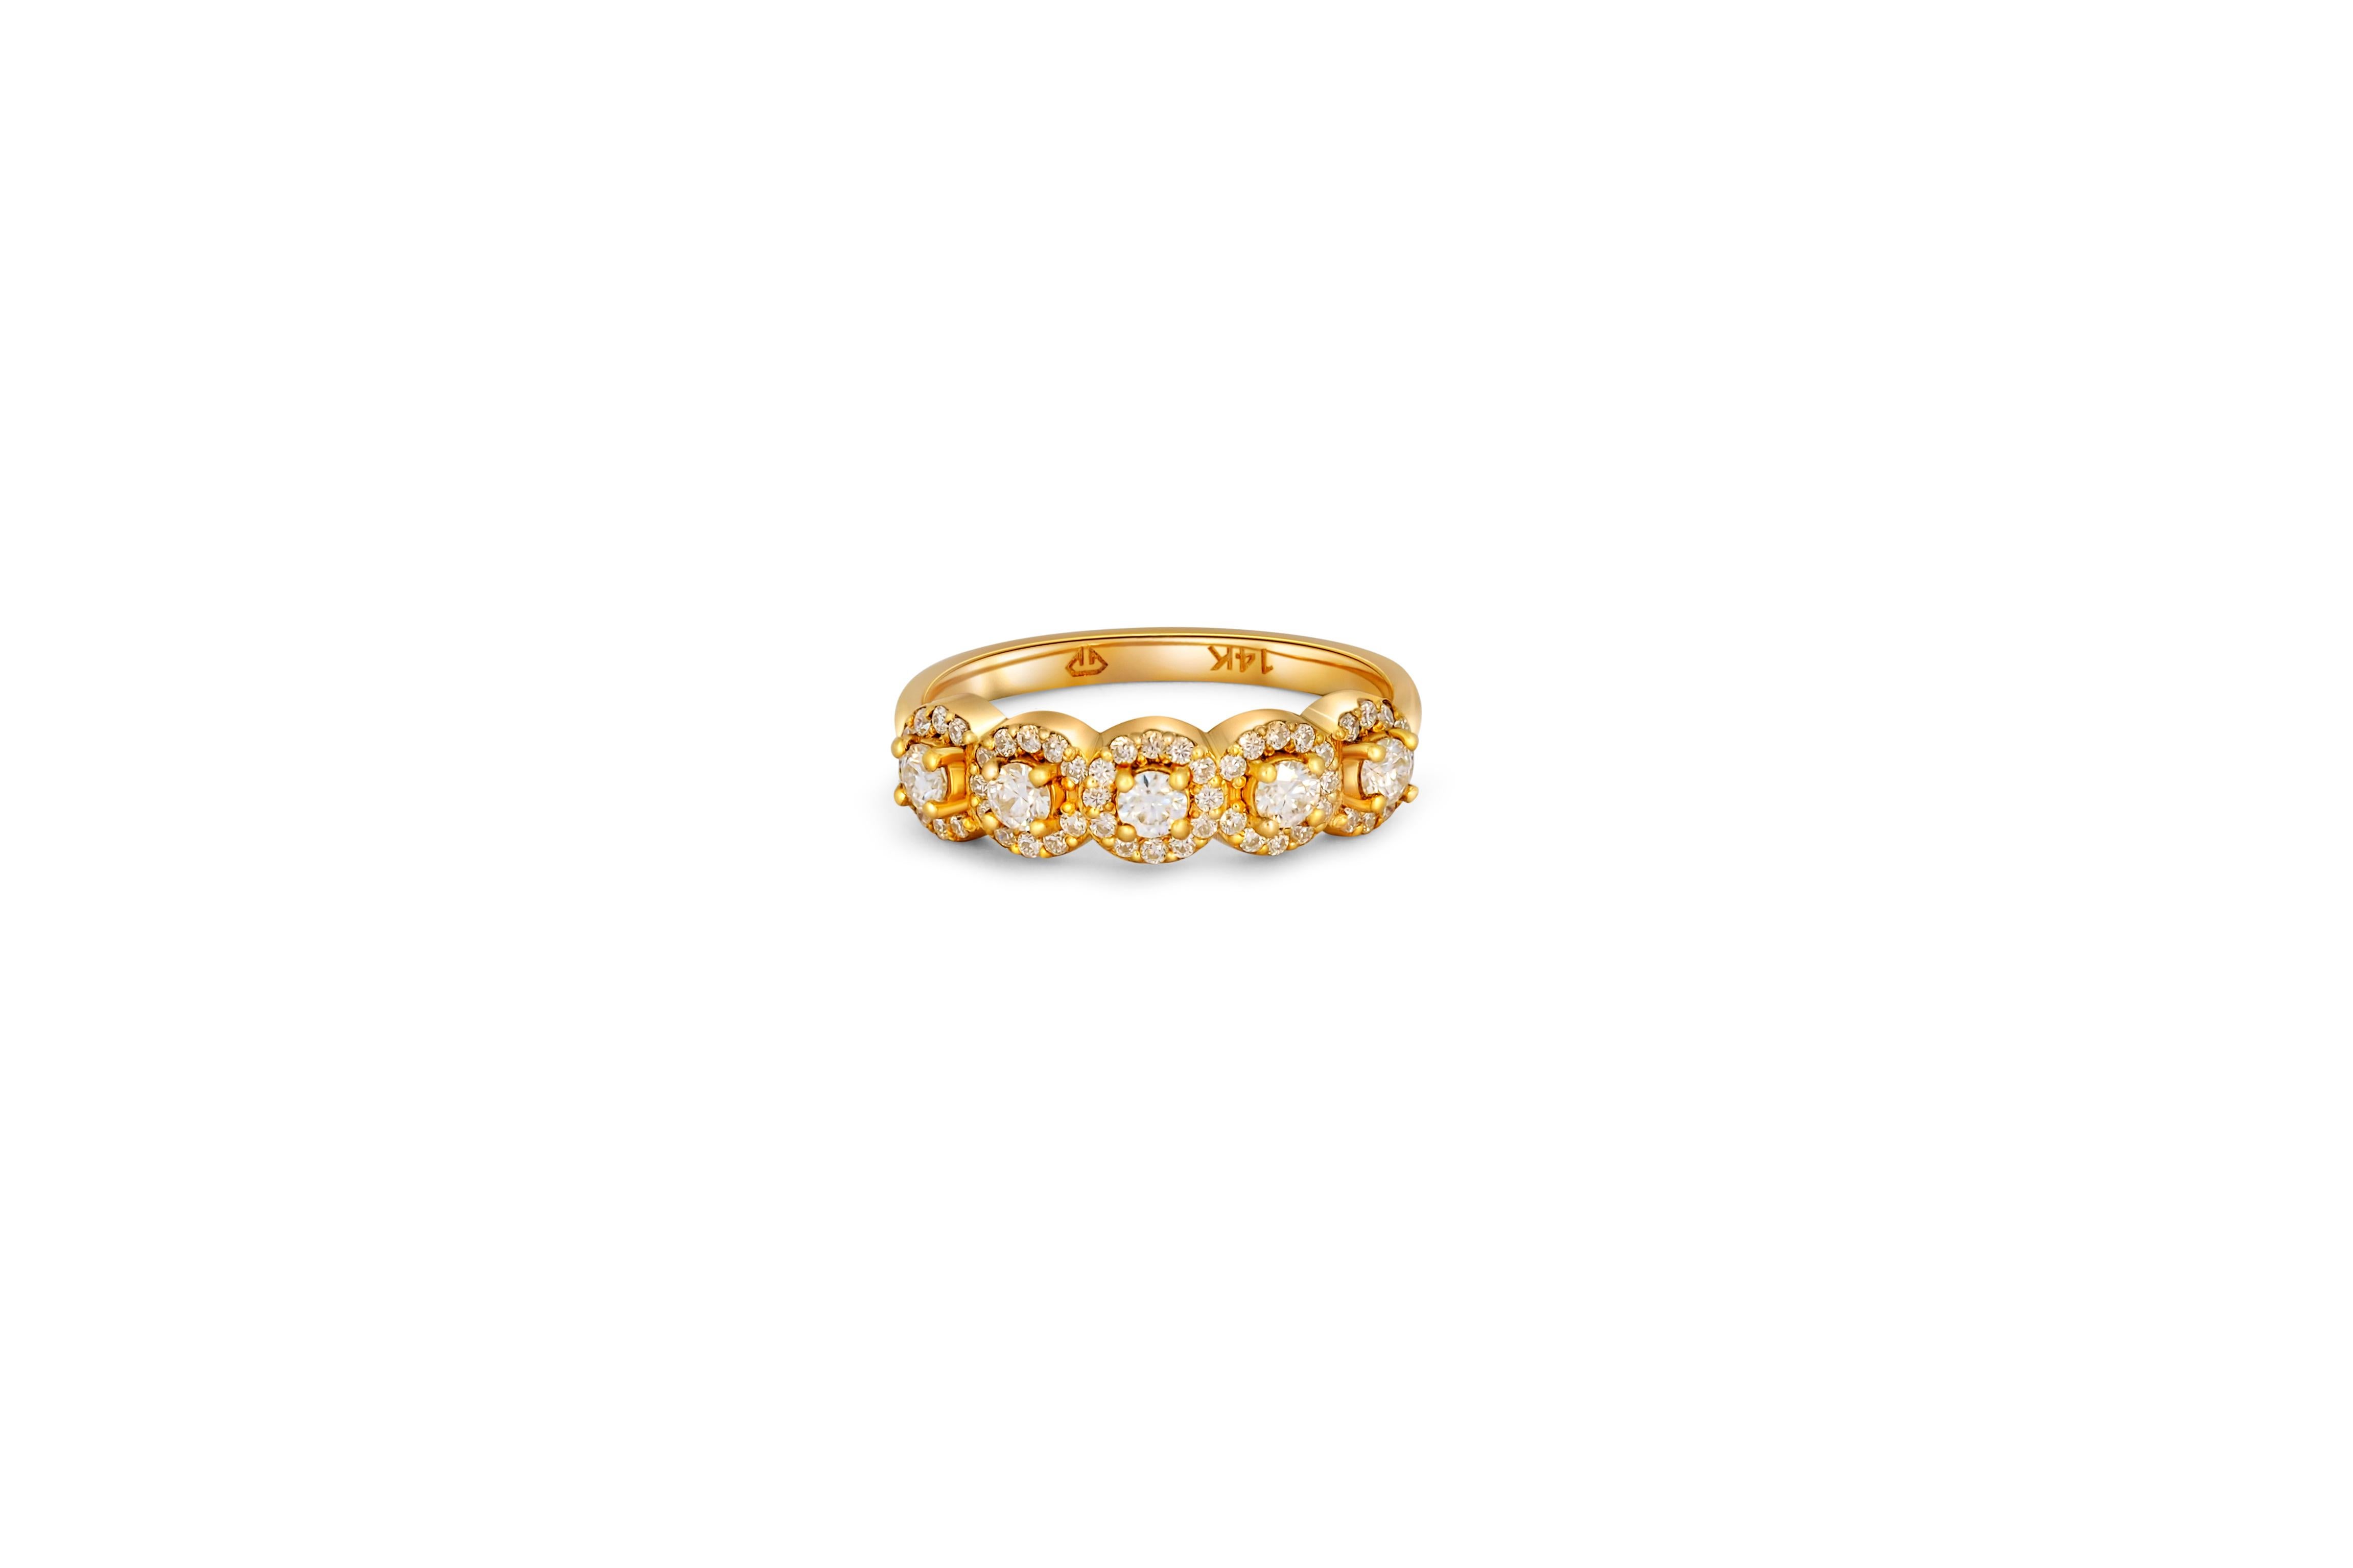 For Sale:  Five-Stone Halo Wedding Band in 14k gold. 6